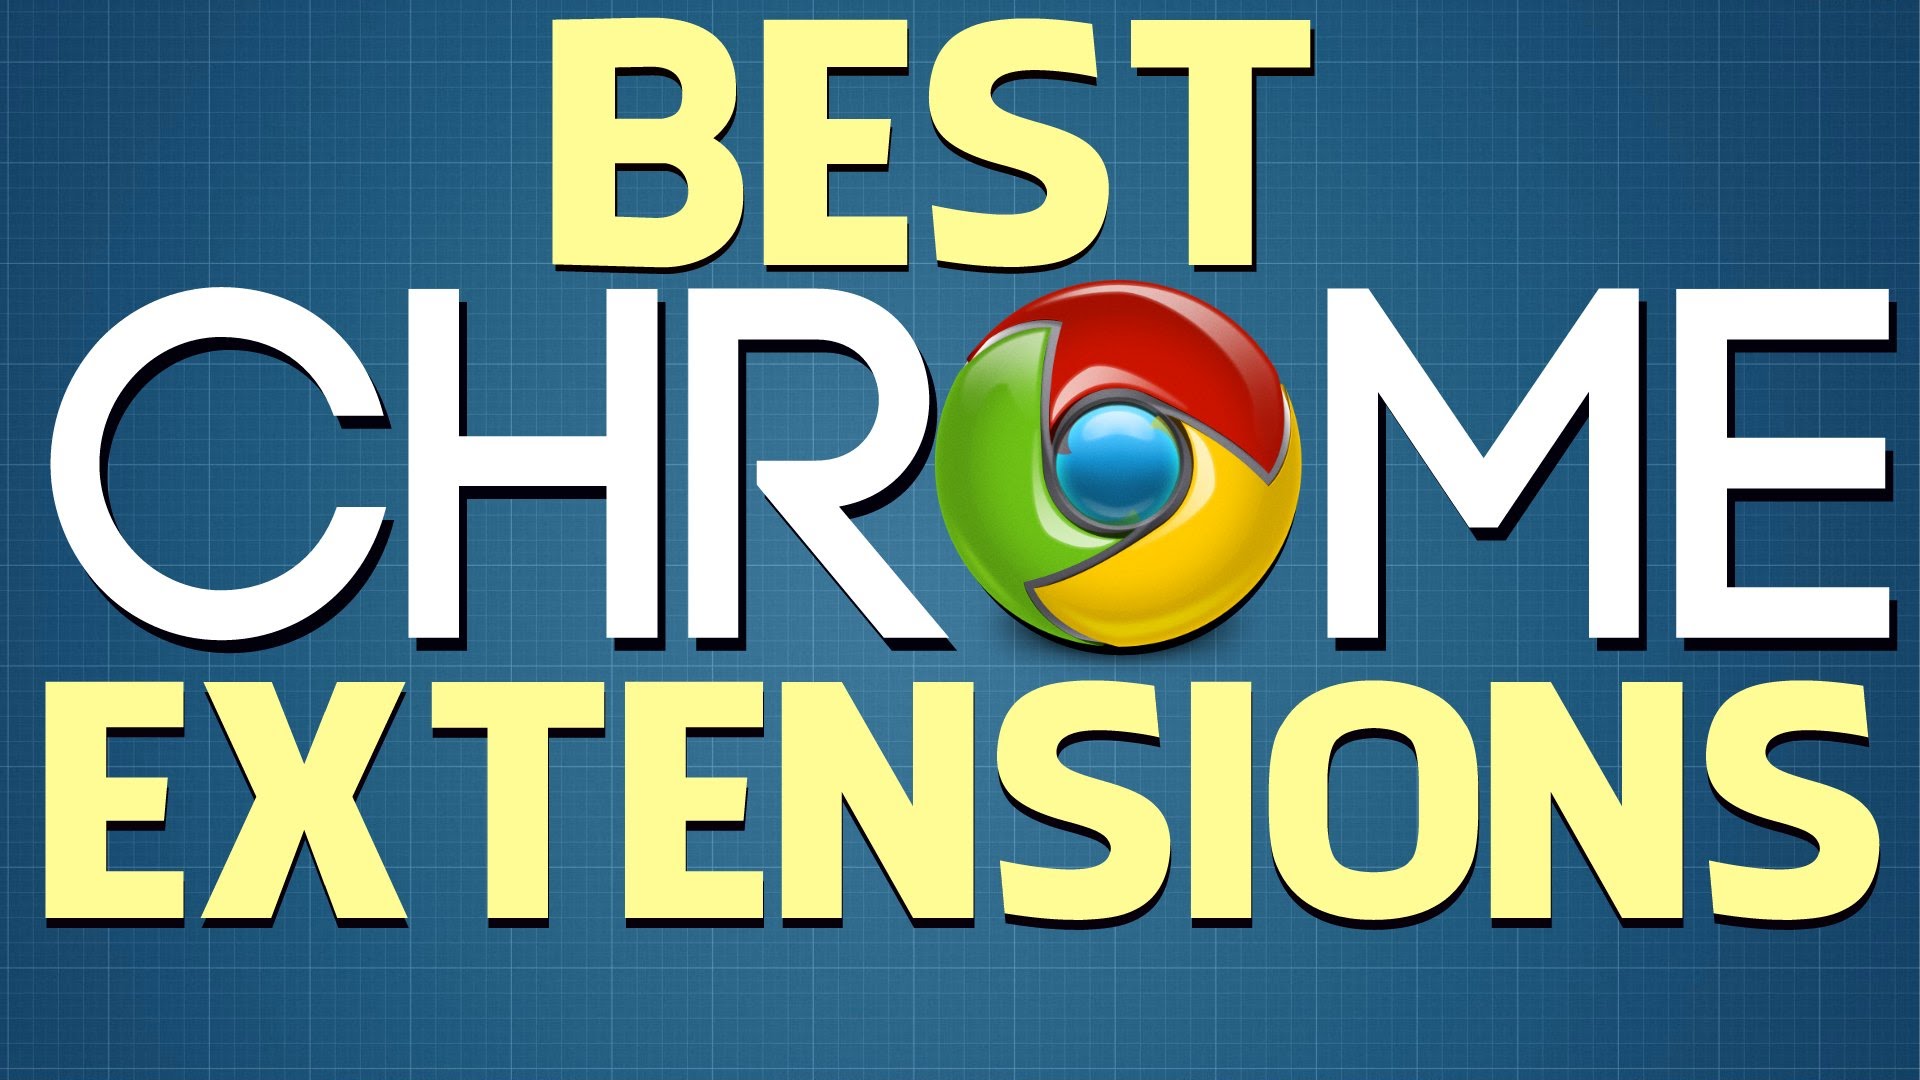 Best extensions. Google Chrome Extensions. Google Chrome. Google Extensions. Unblock Origin Chrome.